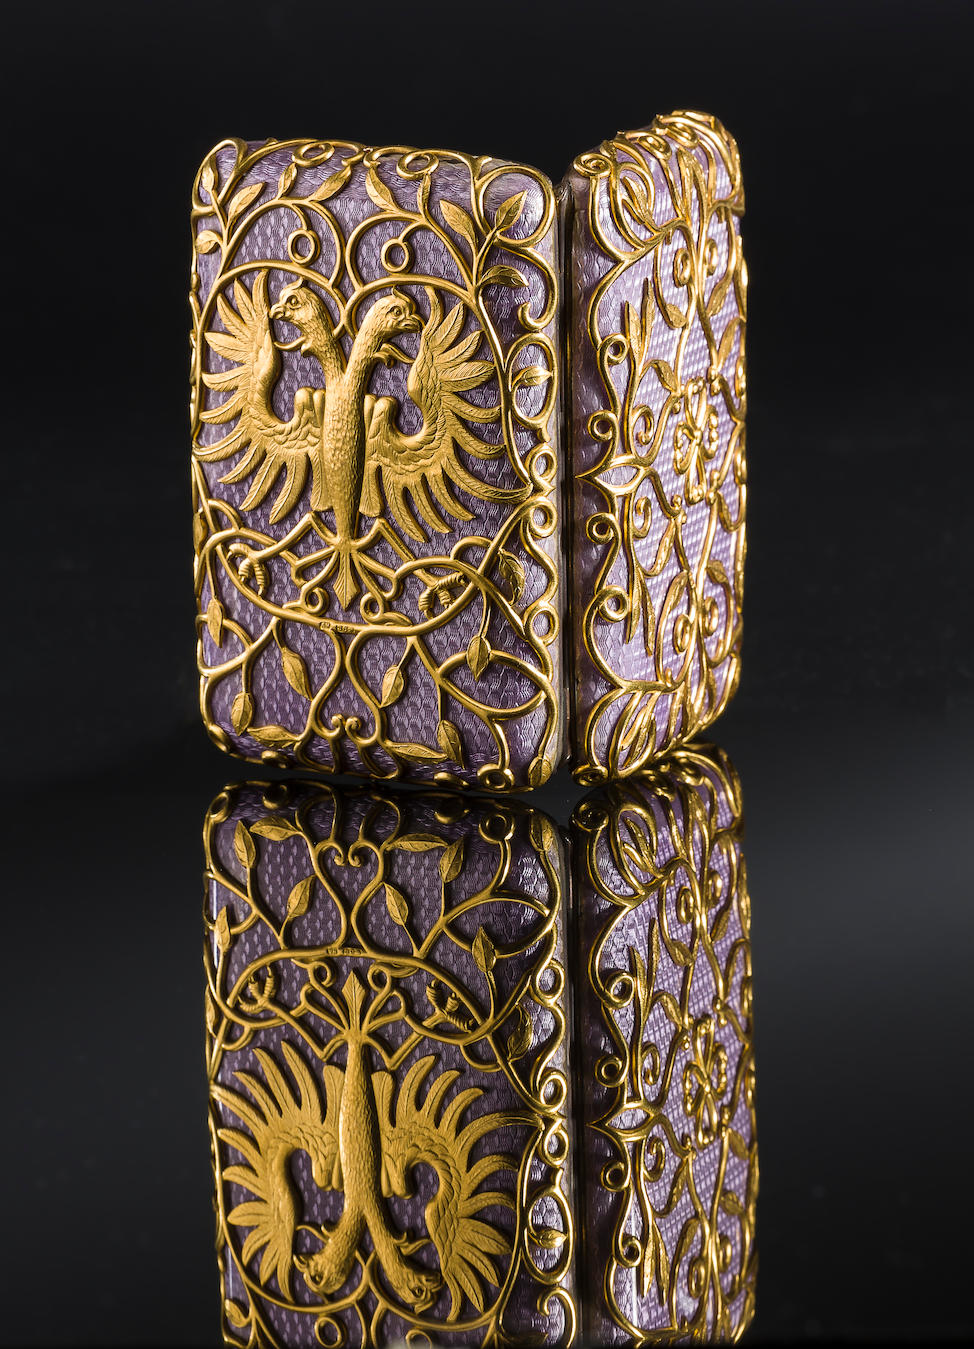 An important Imperial jewelled silver-gilt and enamel cigarette caseFaberg&#233;, workmaster August Holmstr&#246;m, c. 1897, scratched inventory number 56102